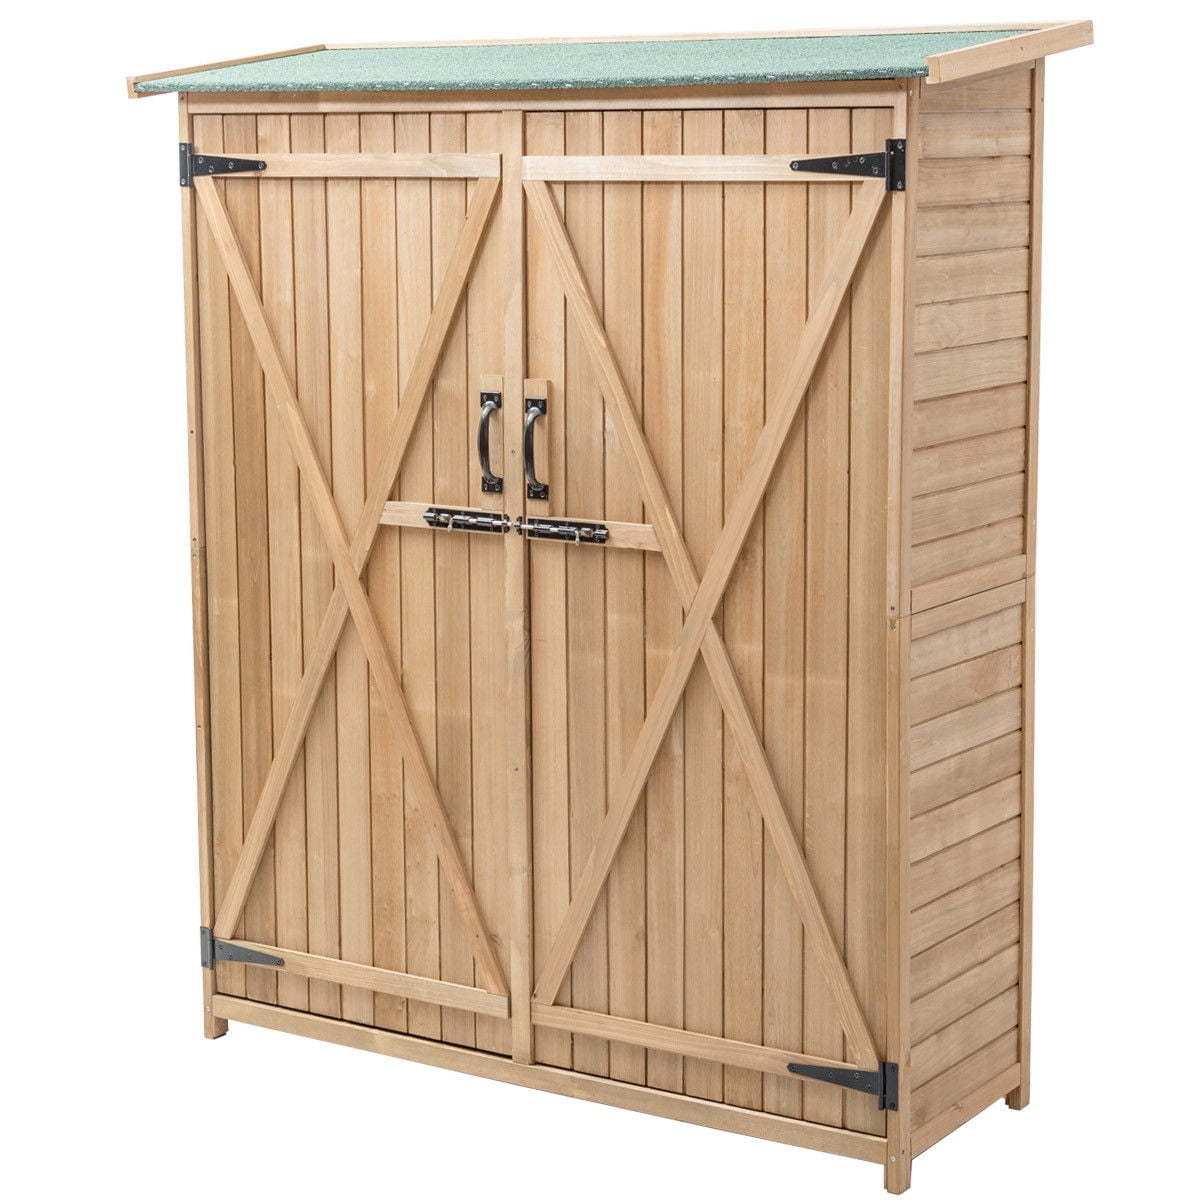 Gymax Garden Outdoor Wooden Storage Shed Cabinet Double